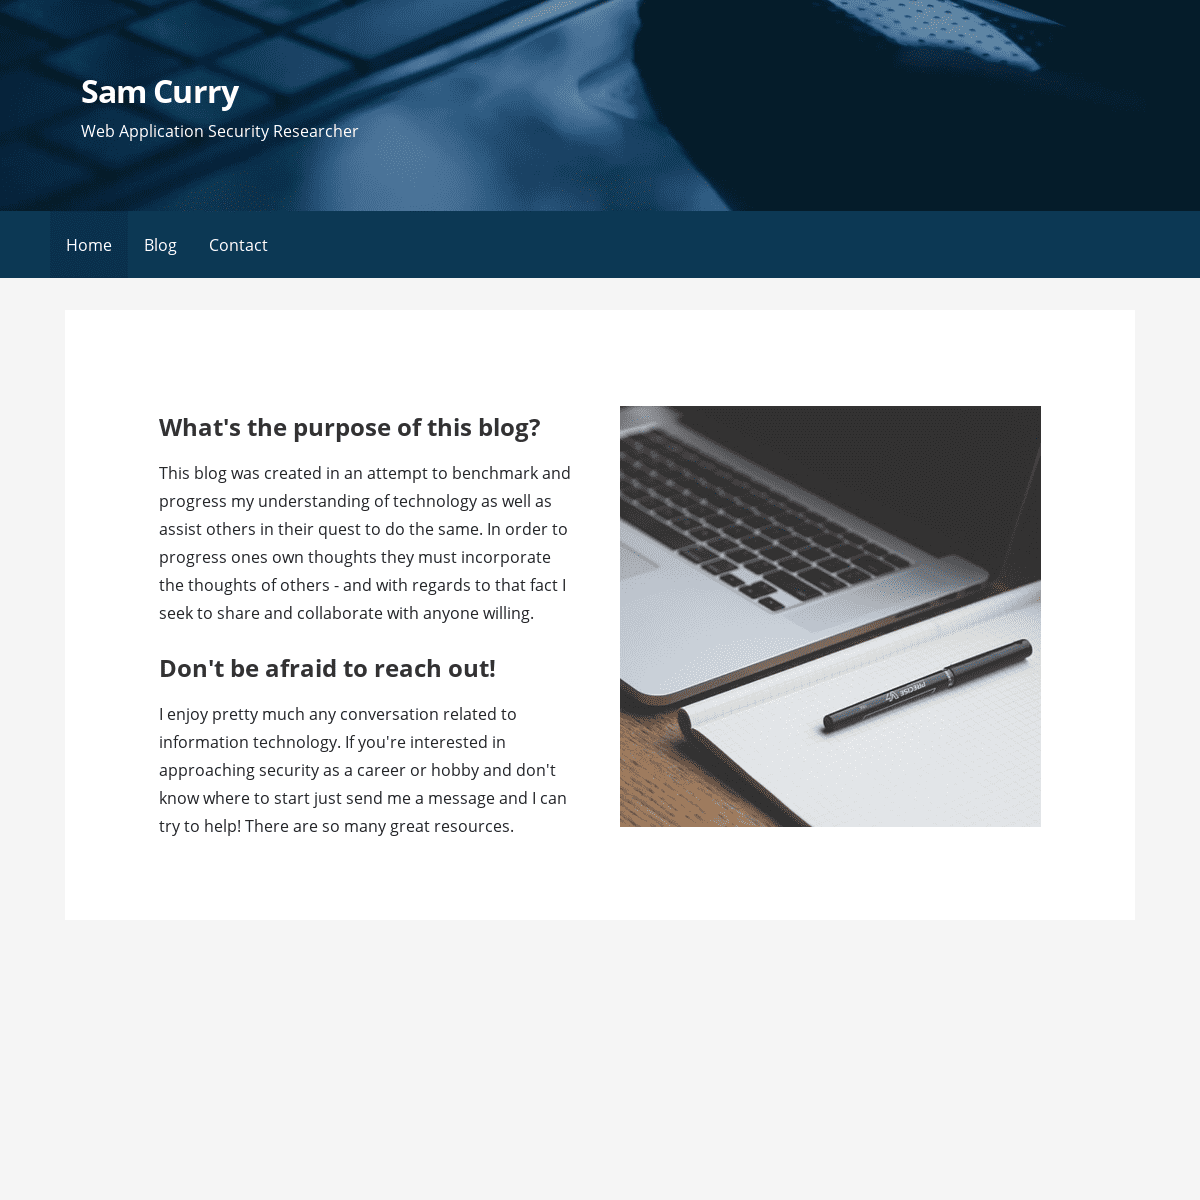 A complete backup of https://samcurry.net